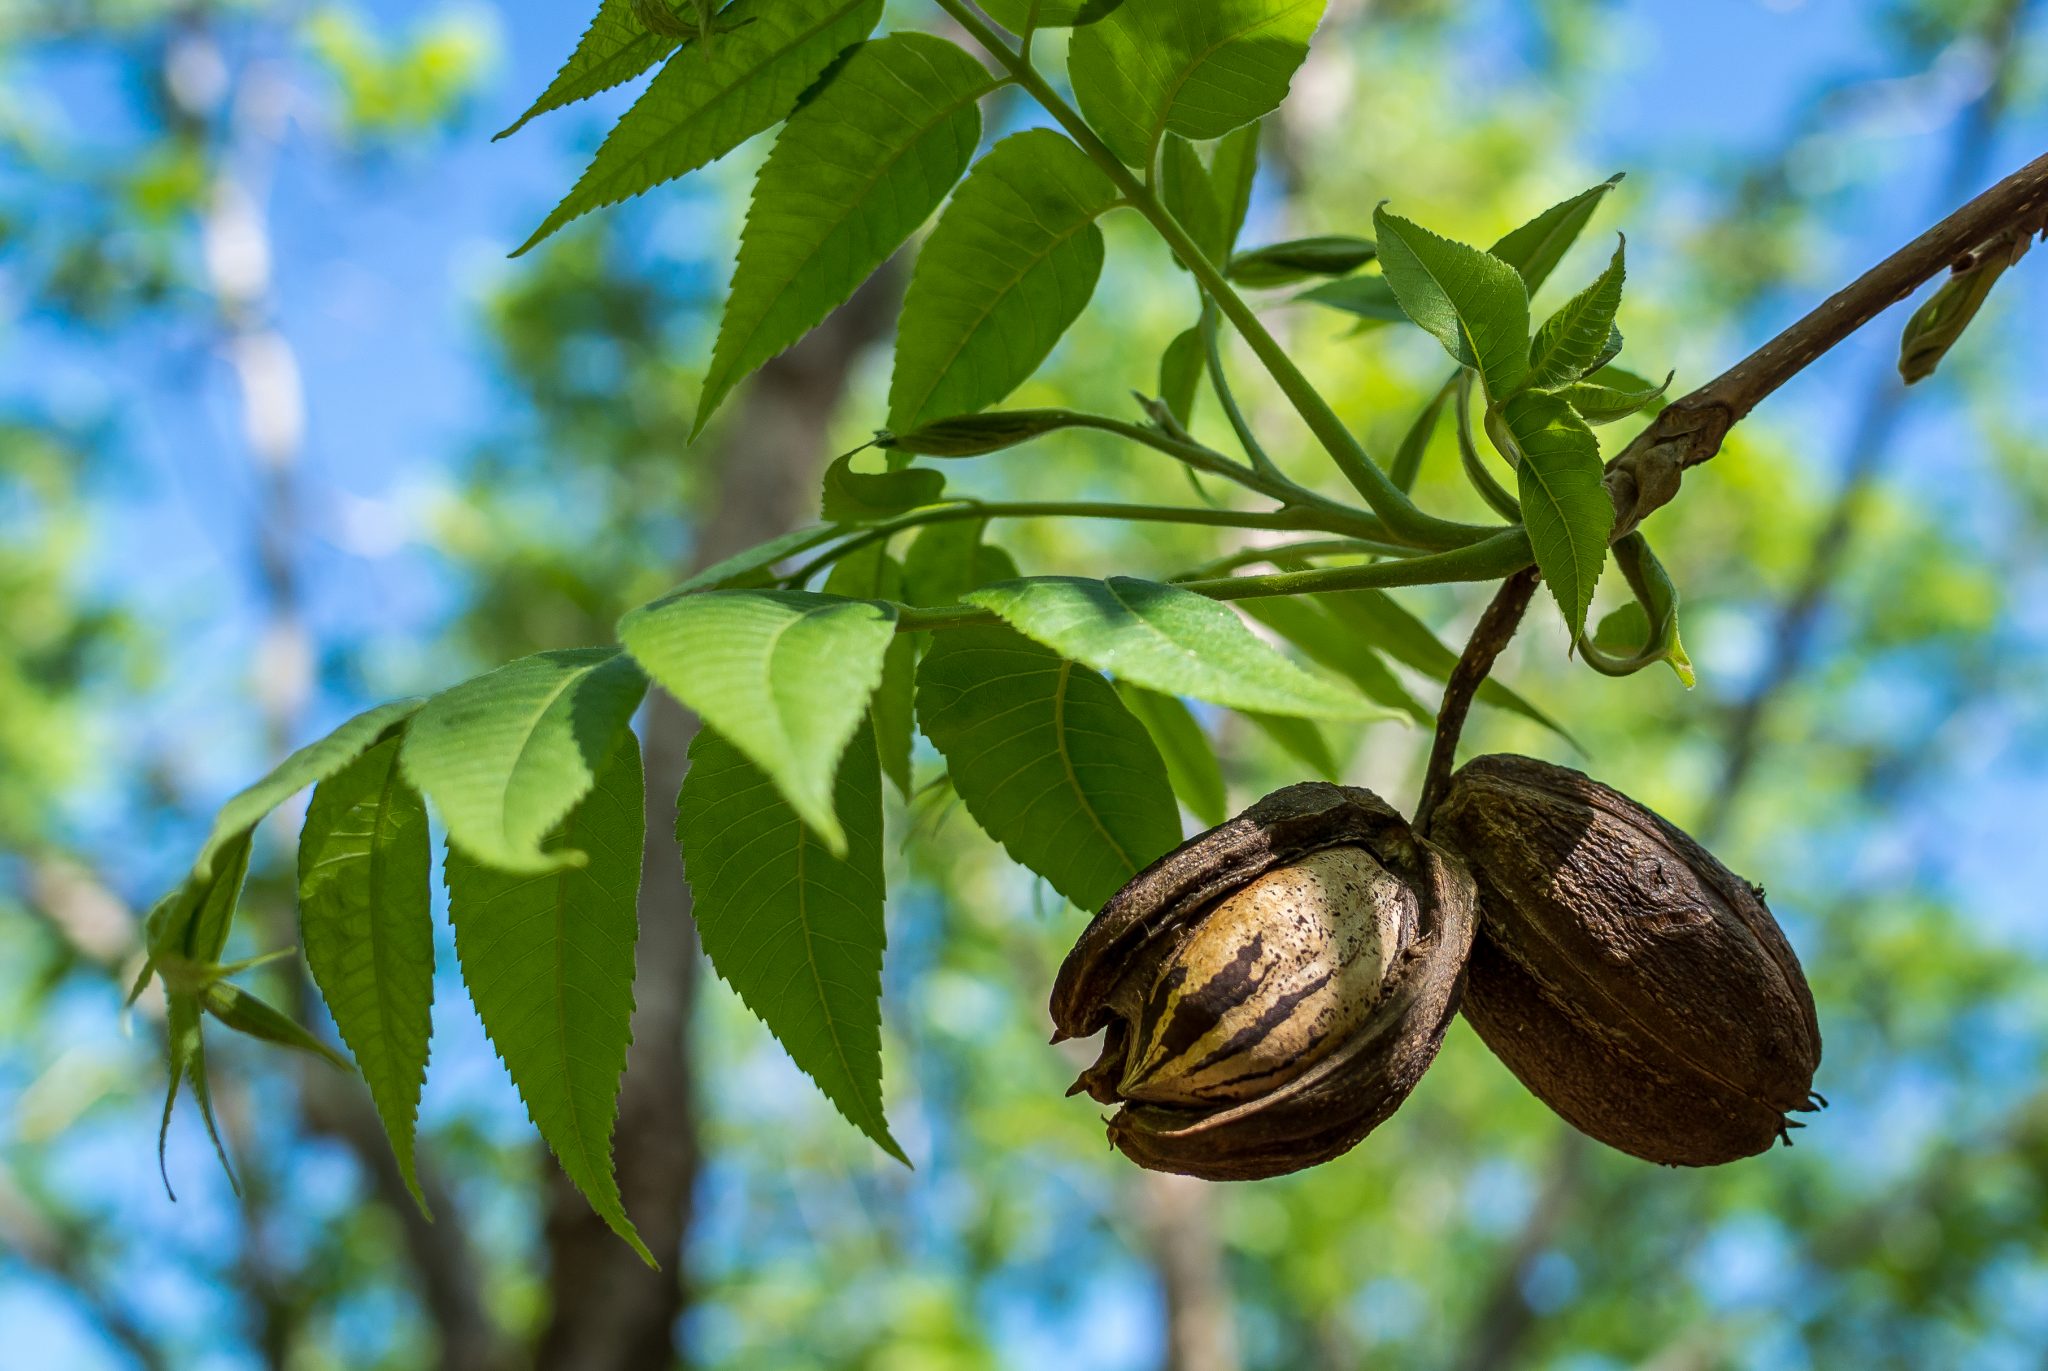 Pecan nuts from the previous season hanging among the new growth of spring.